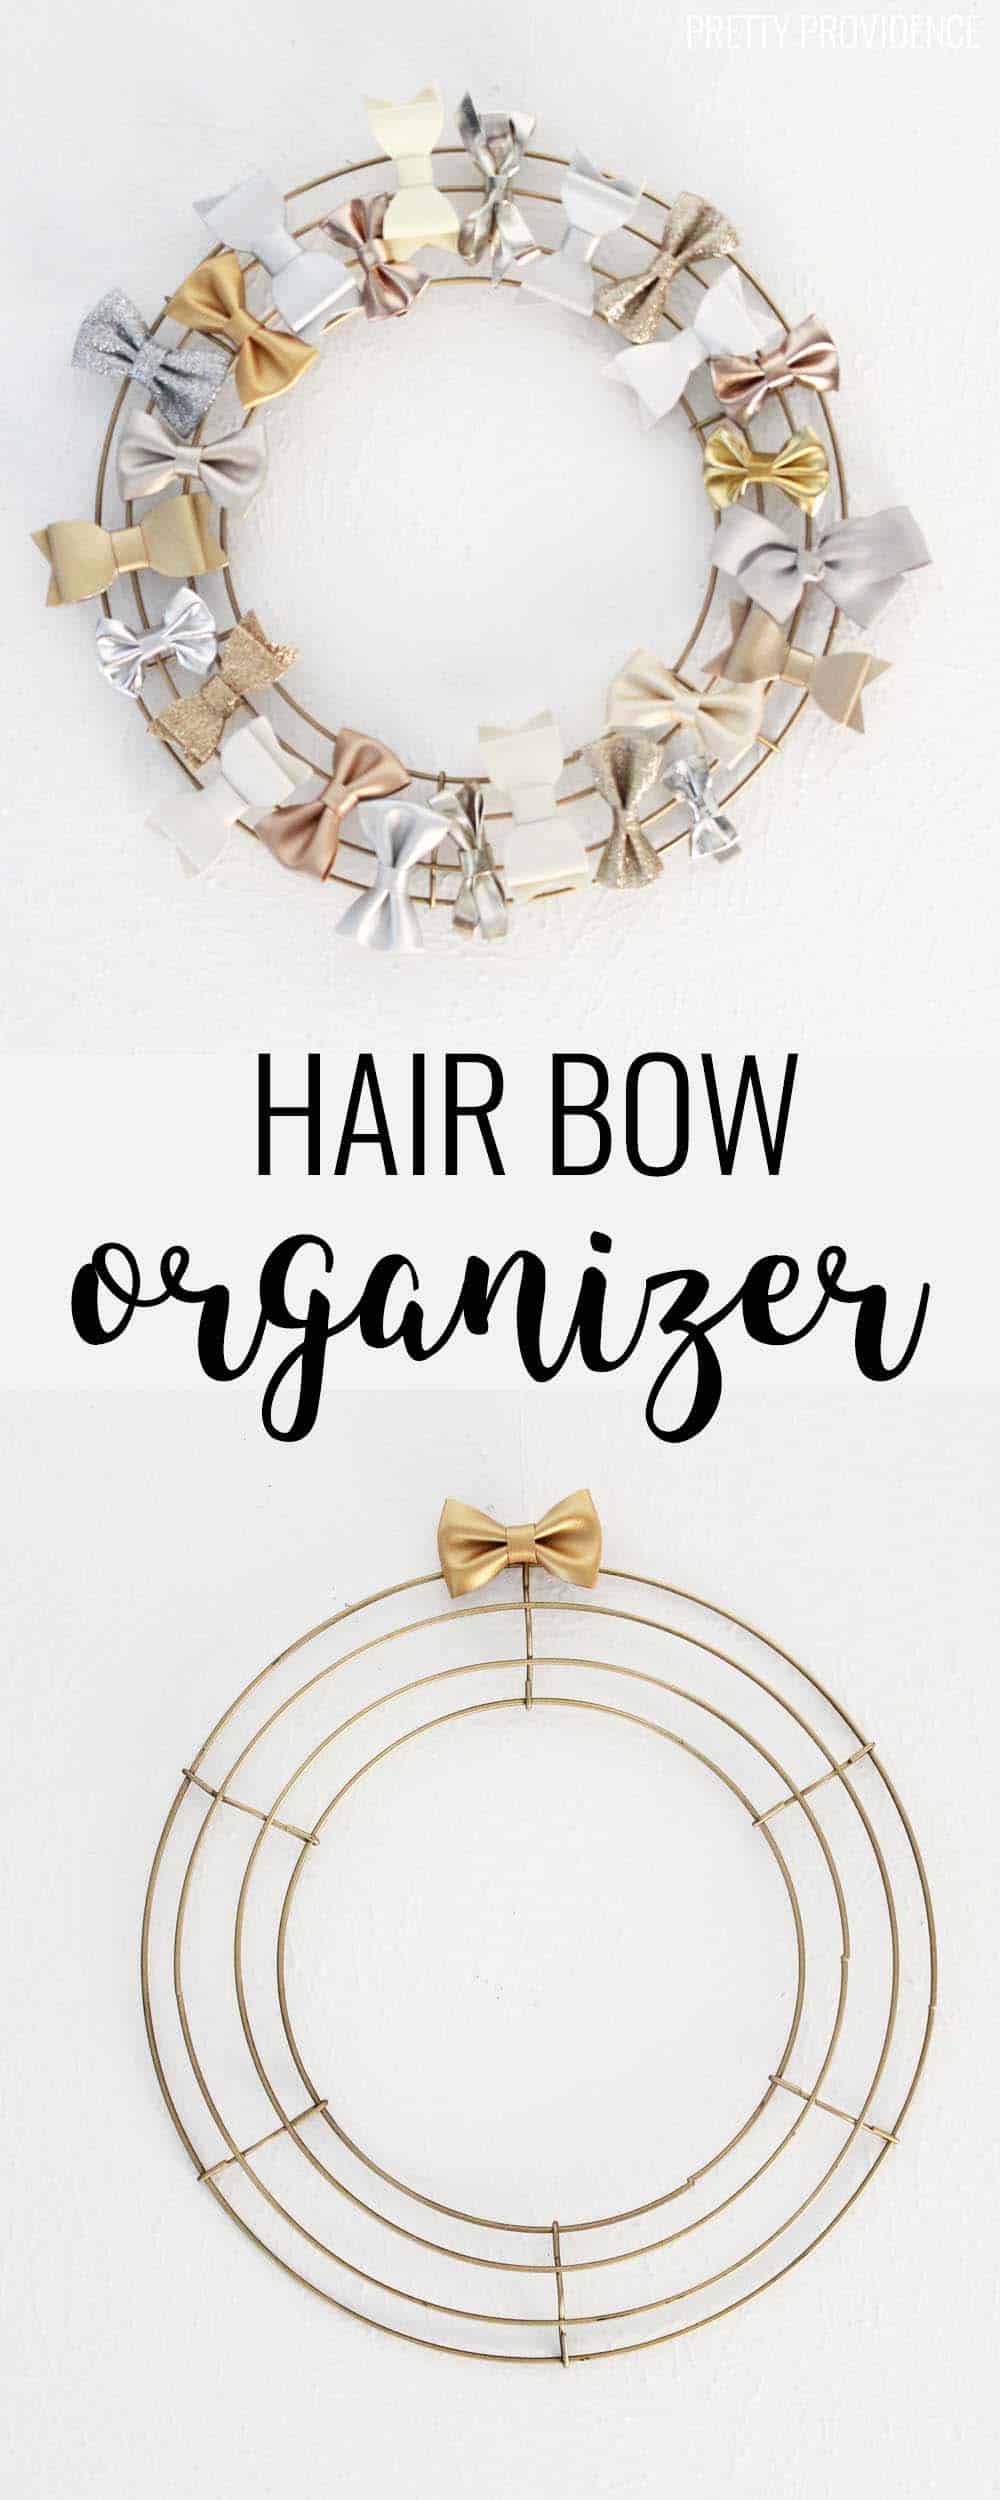 This is a great way to organize girls' bows! All you need is a wreath form and some spray paint! 